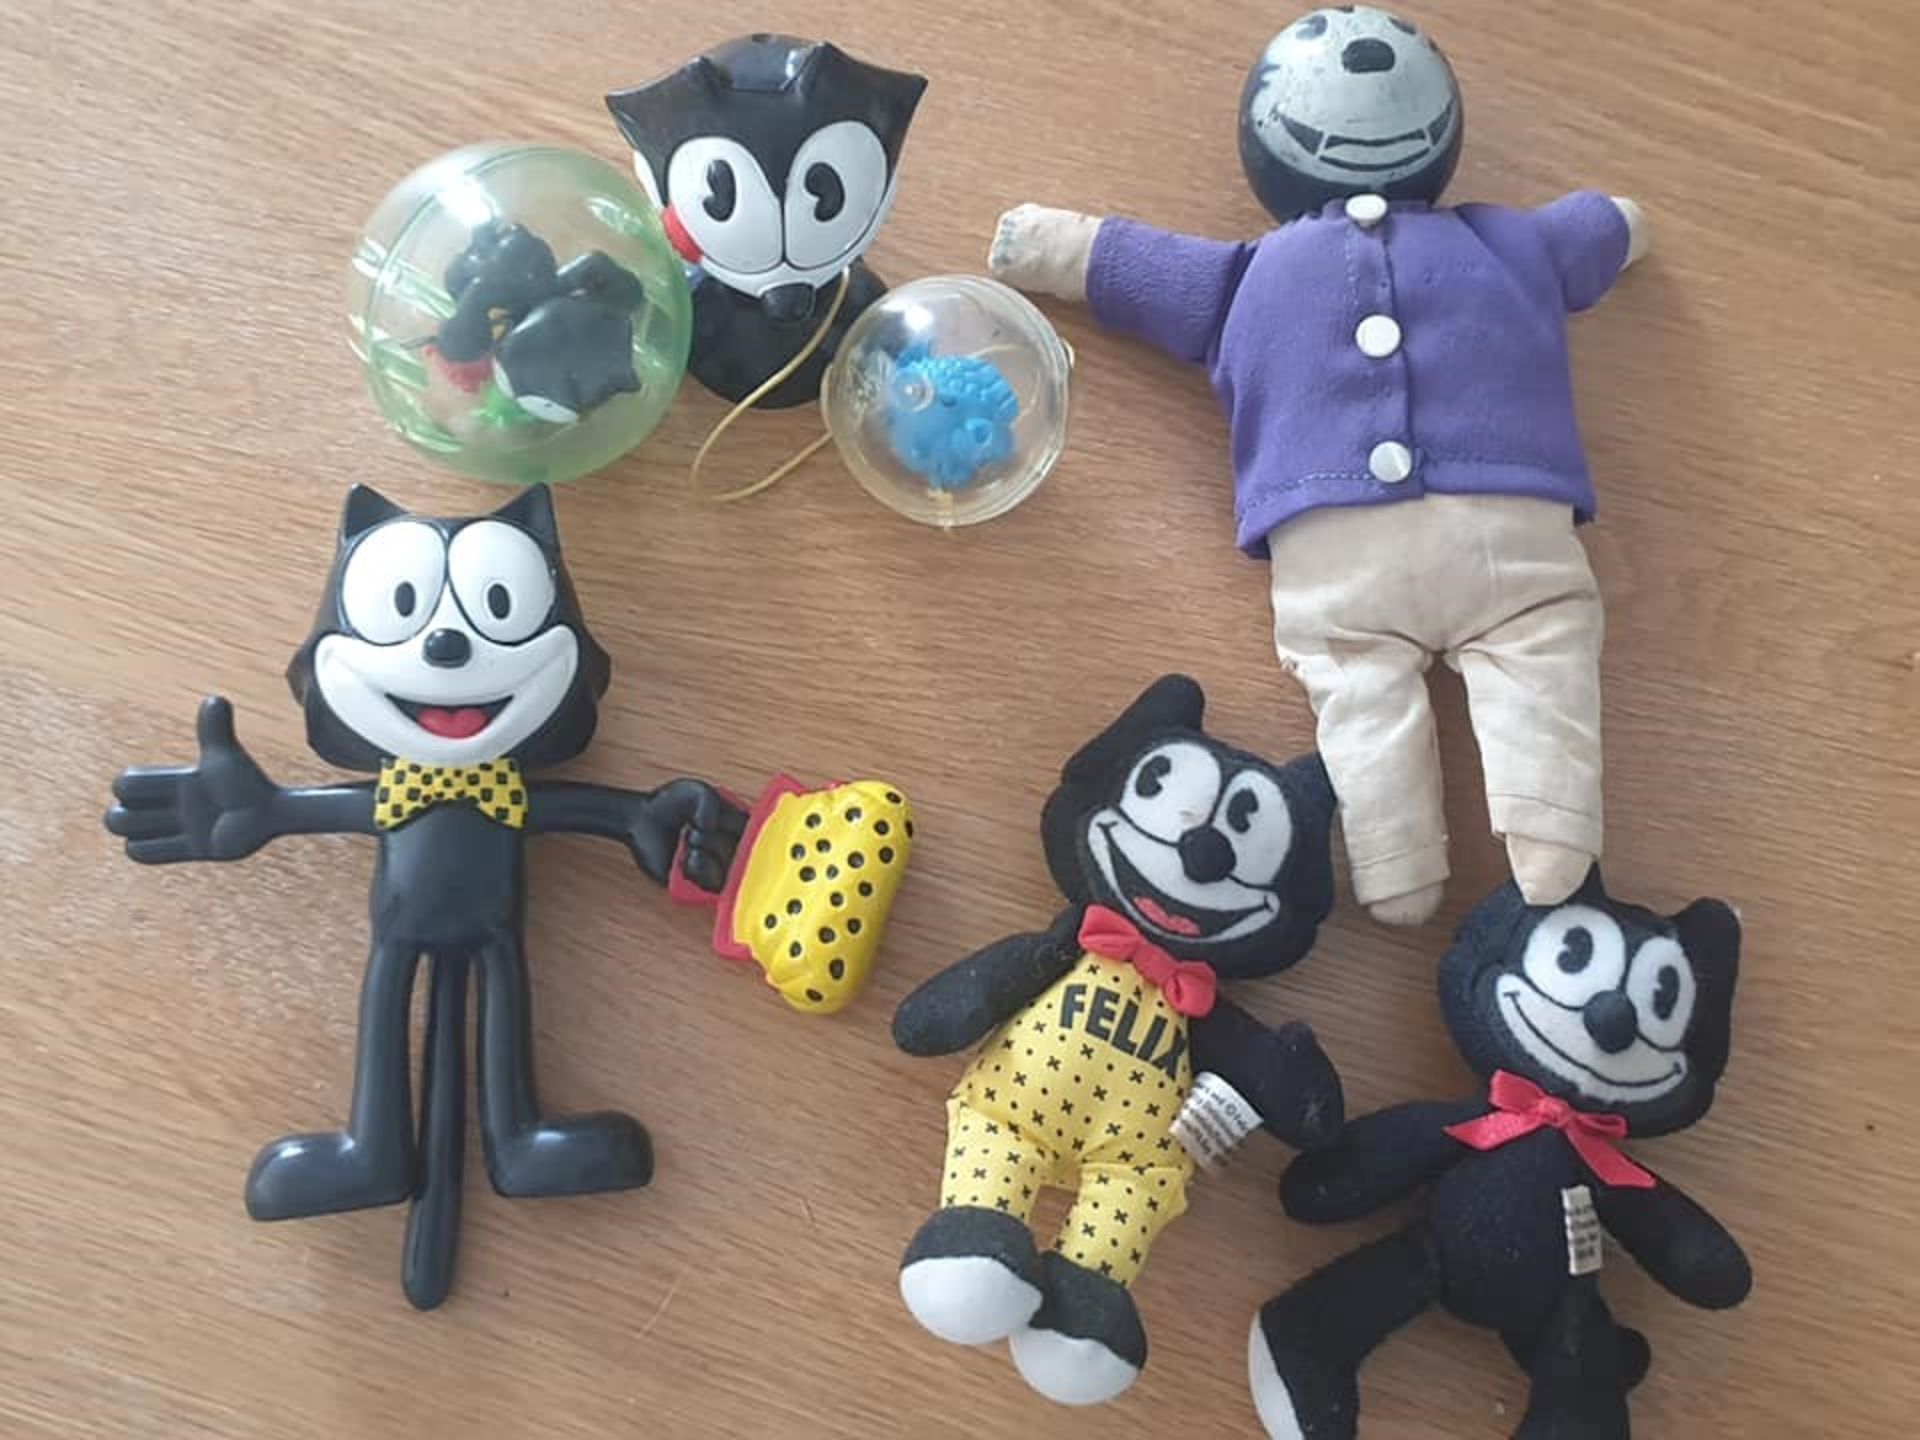 Collection Of Felix The Cat Toys Figures 6 pieces total All From The Late 1980S As Original Toys